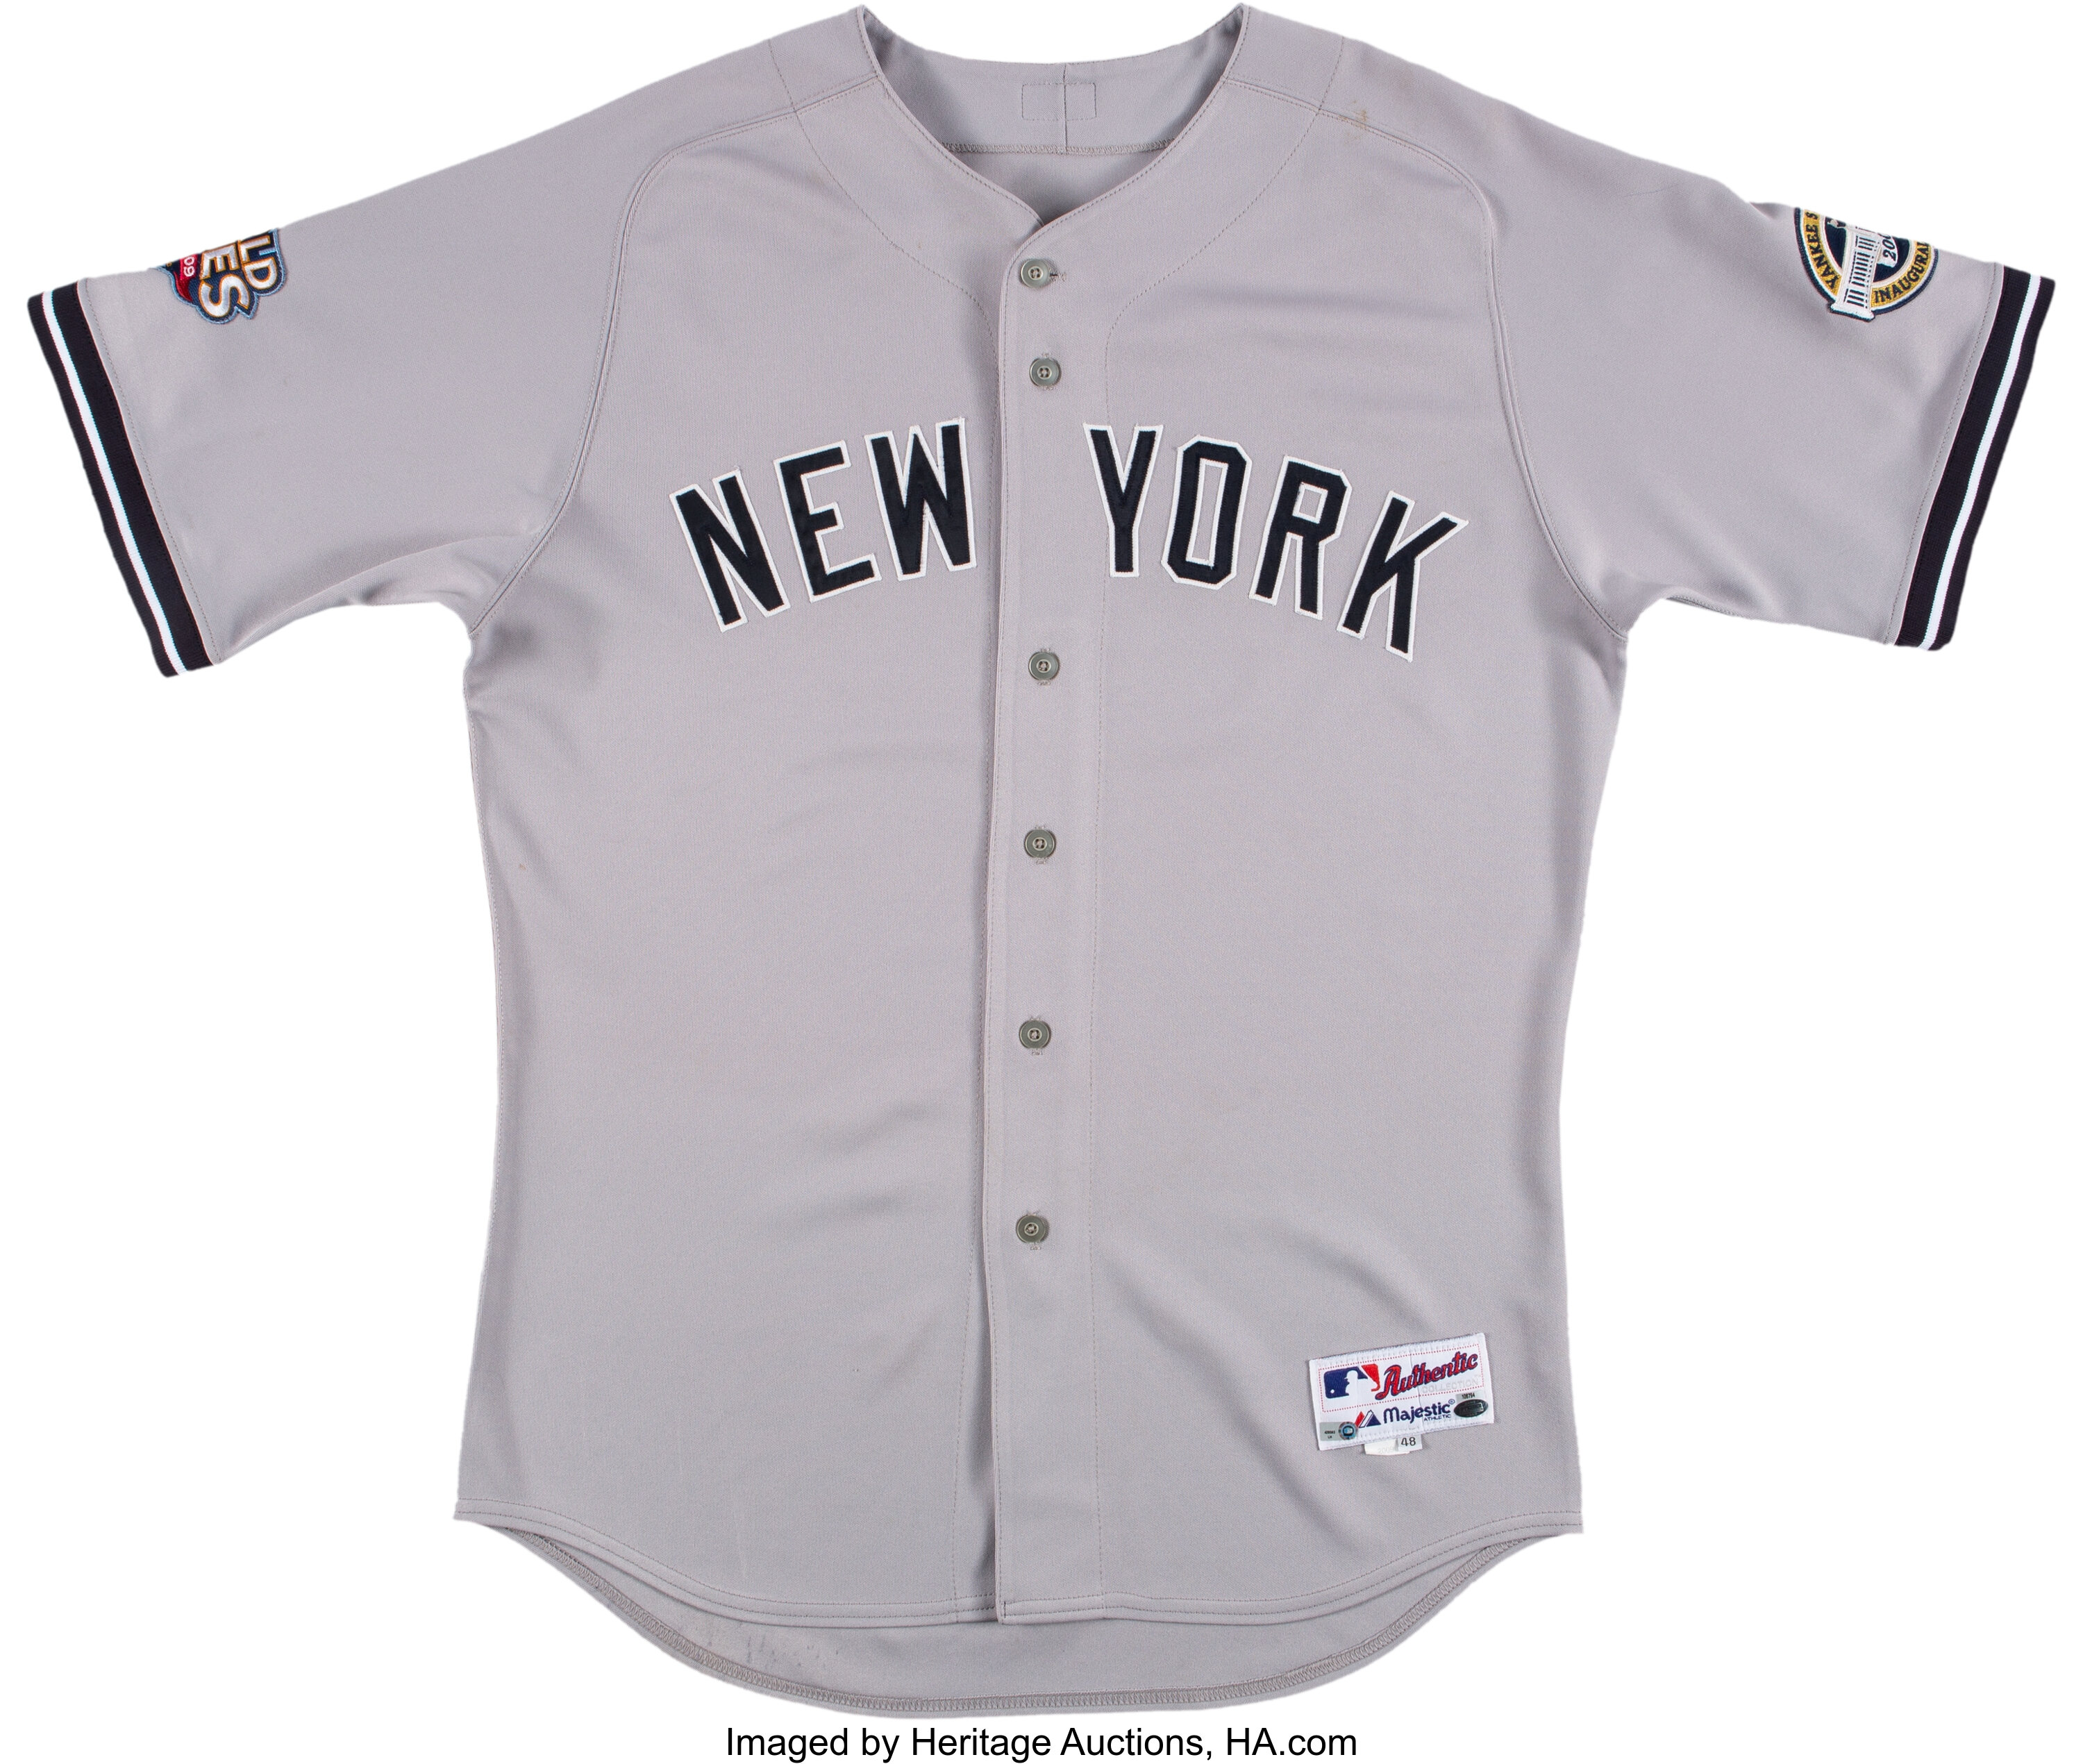 2009 World Series Yankees Authentic Home Jersey Customized with